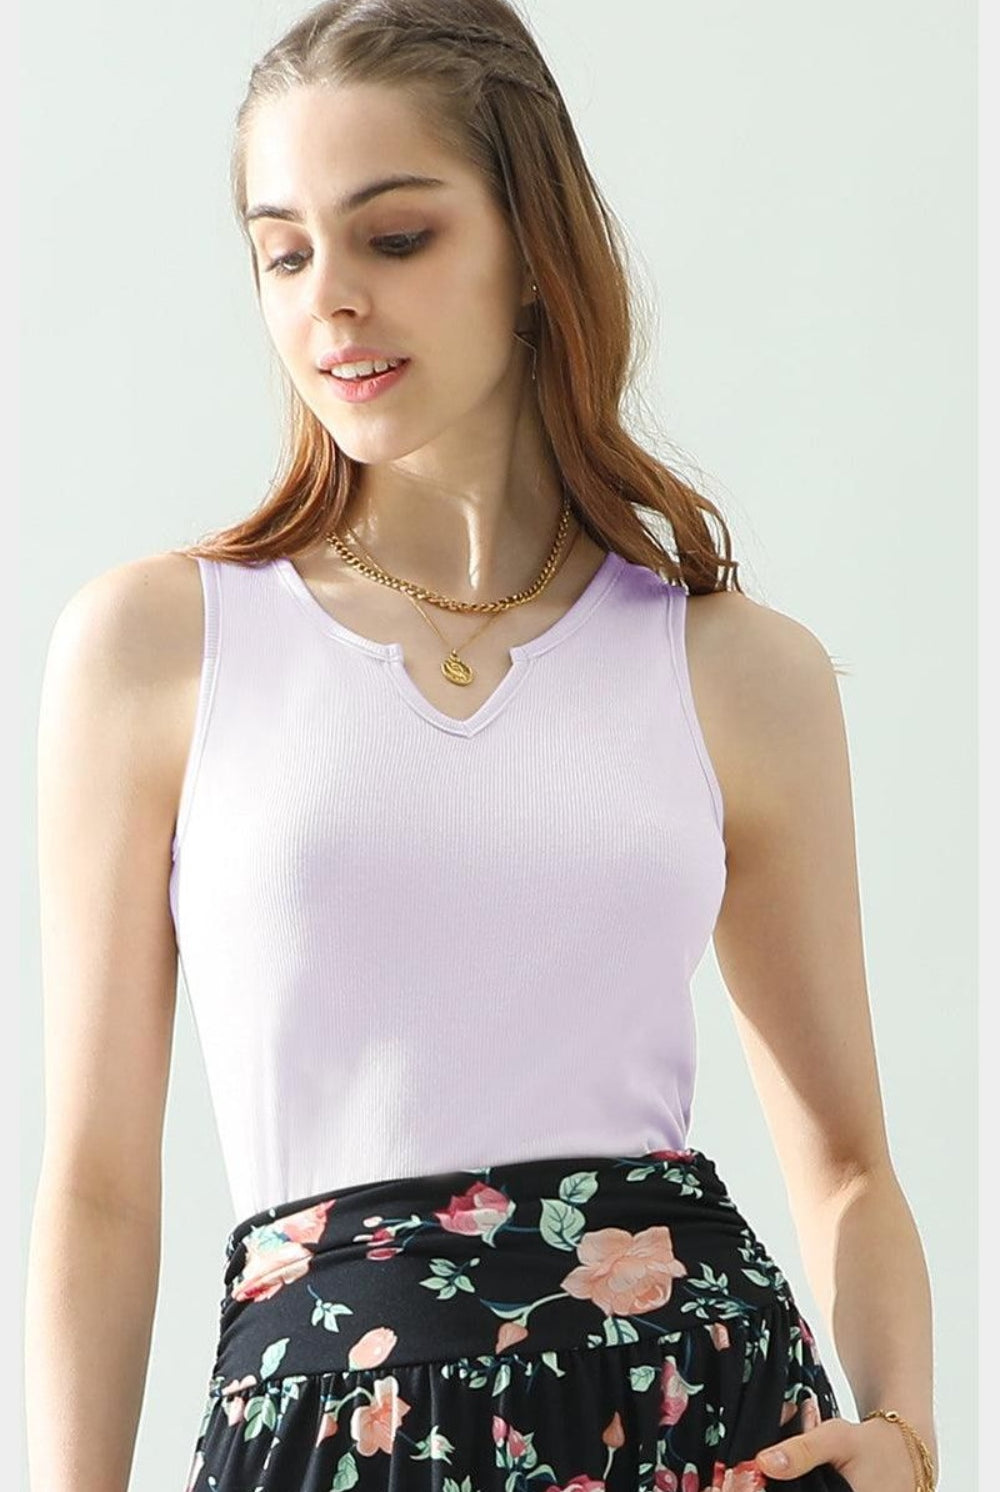 A model beams in a sleeveless knit tank top featuring a subtle ribbed texture and a scoop neckline, styled with a floral-print skirt. She is accessorized with layered necklaces and bracelets, presenting a chic and approachable look. The tank's knit design offers a cozy yet elegant element, available in a range of colors to suit different styles and preferences.